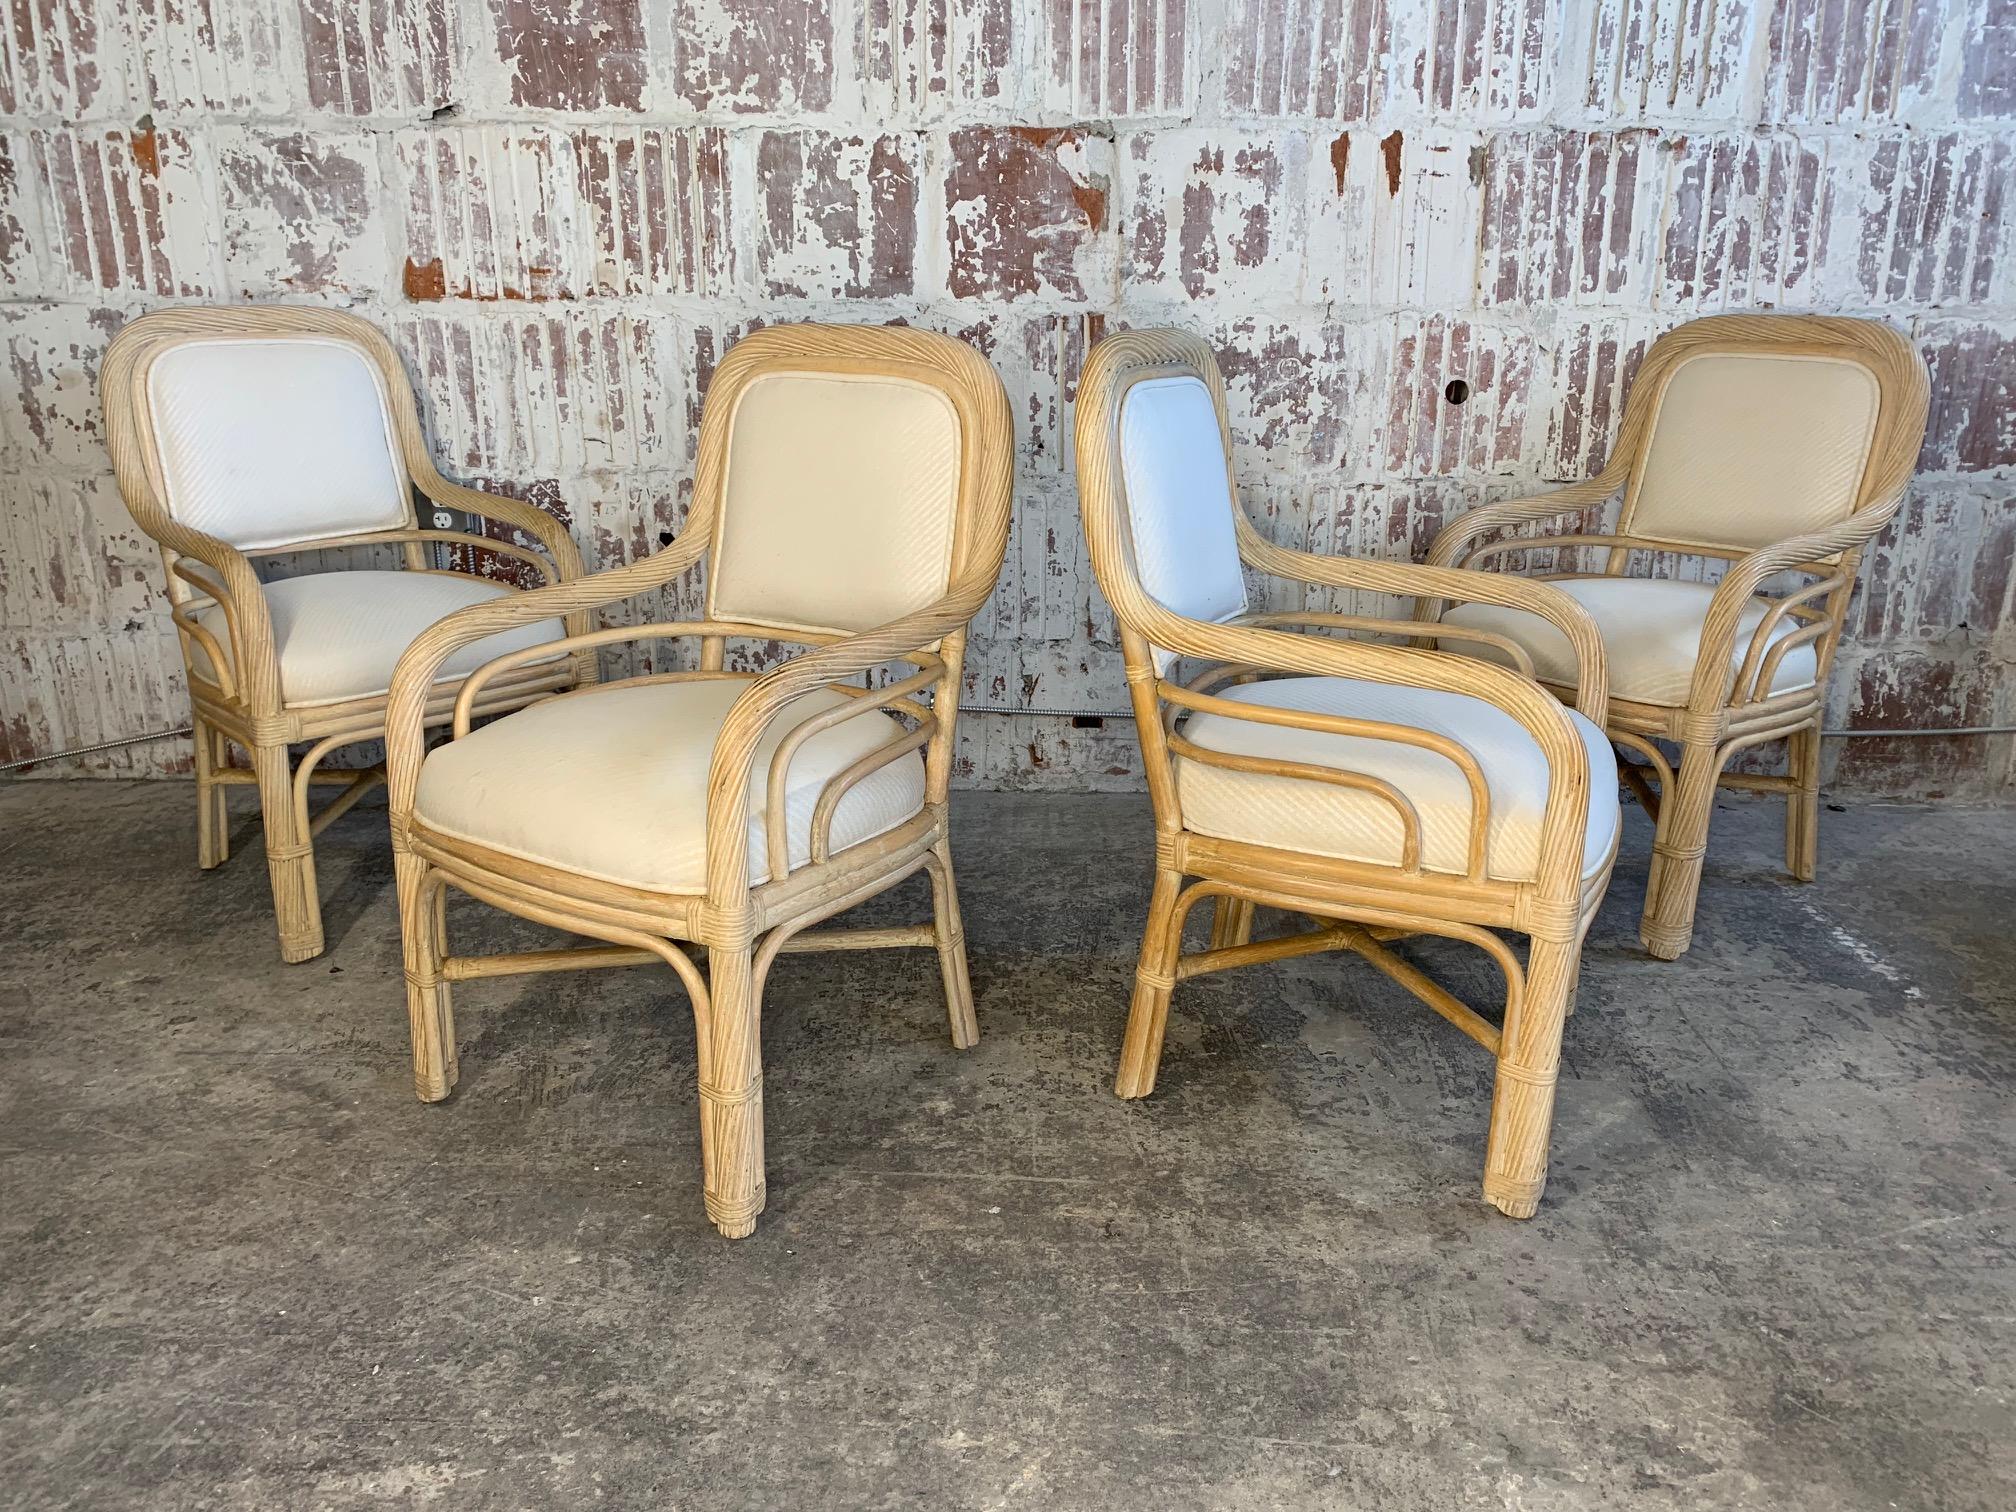 Set of 4 twisted rattan dining chairs feature tone on tone striped upholstery and are in very good vintage condition with minimal signs of age appropriate wear.
Measures: Arm height is 24